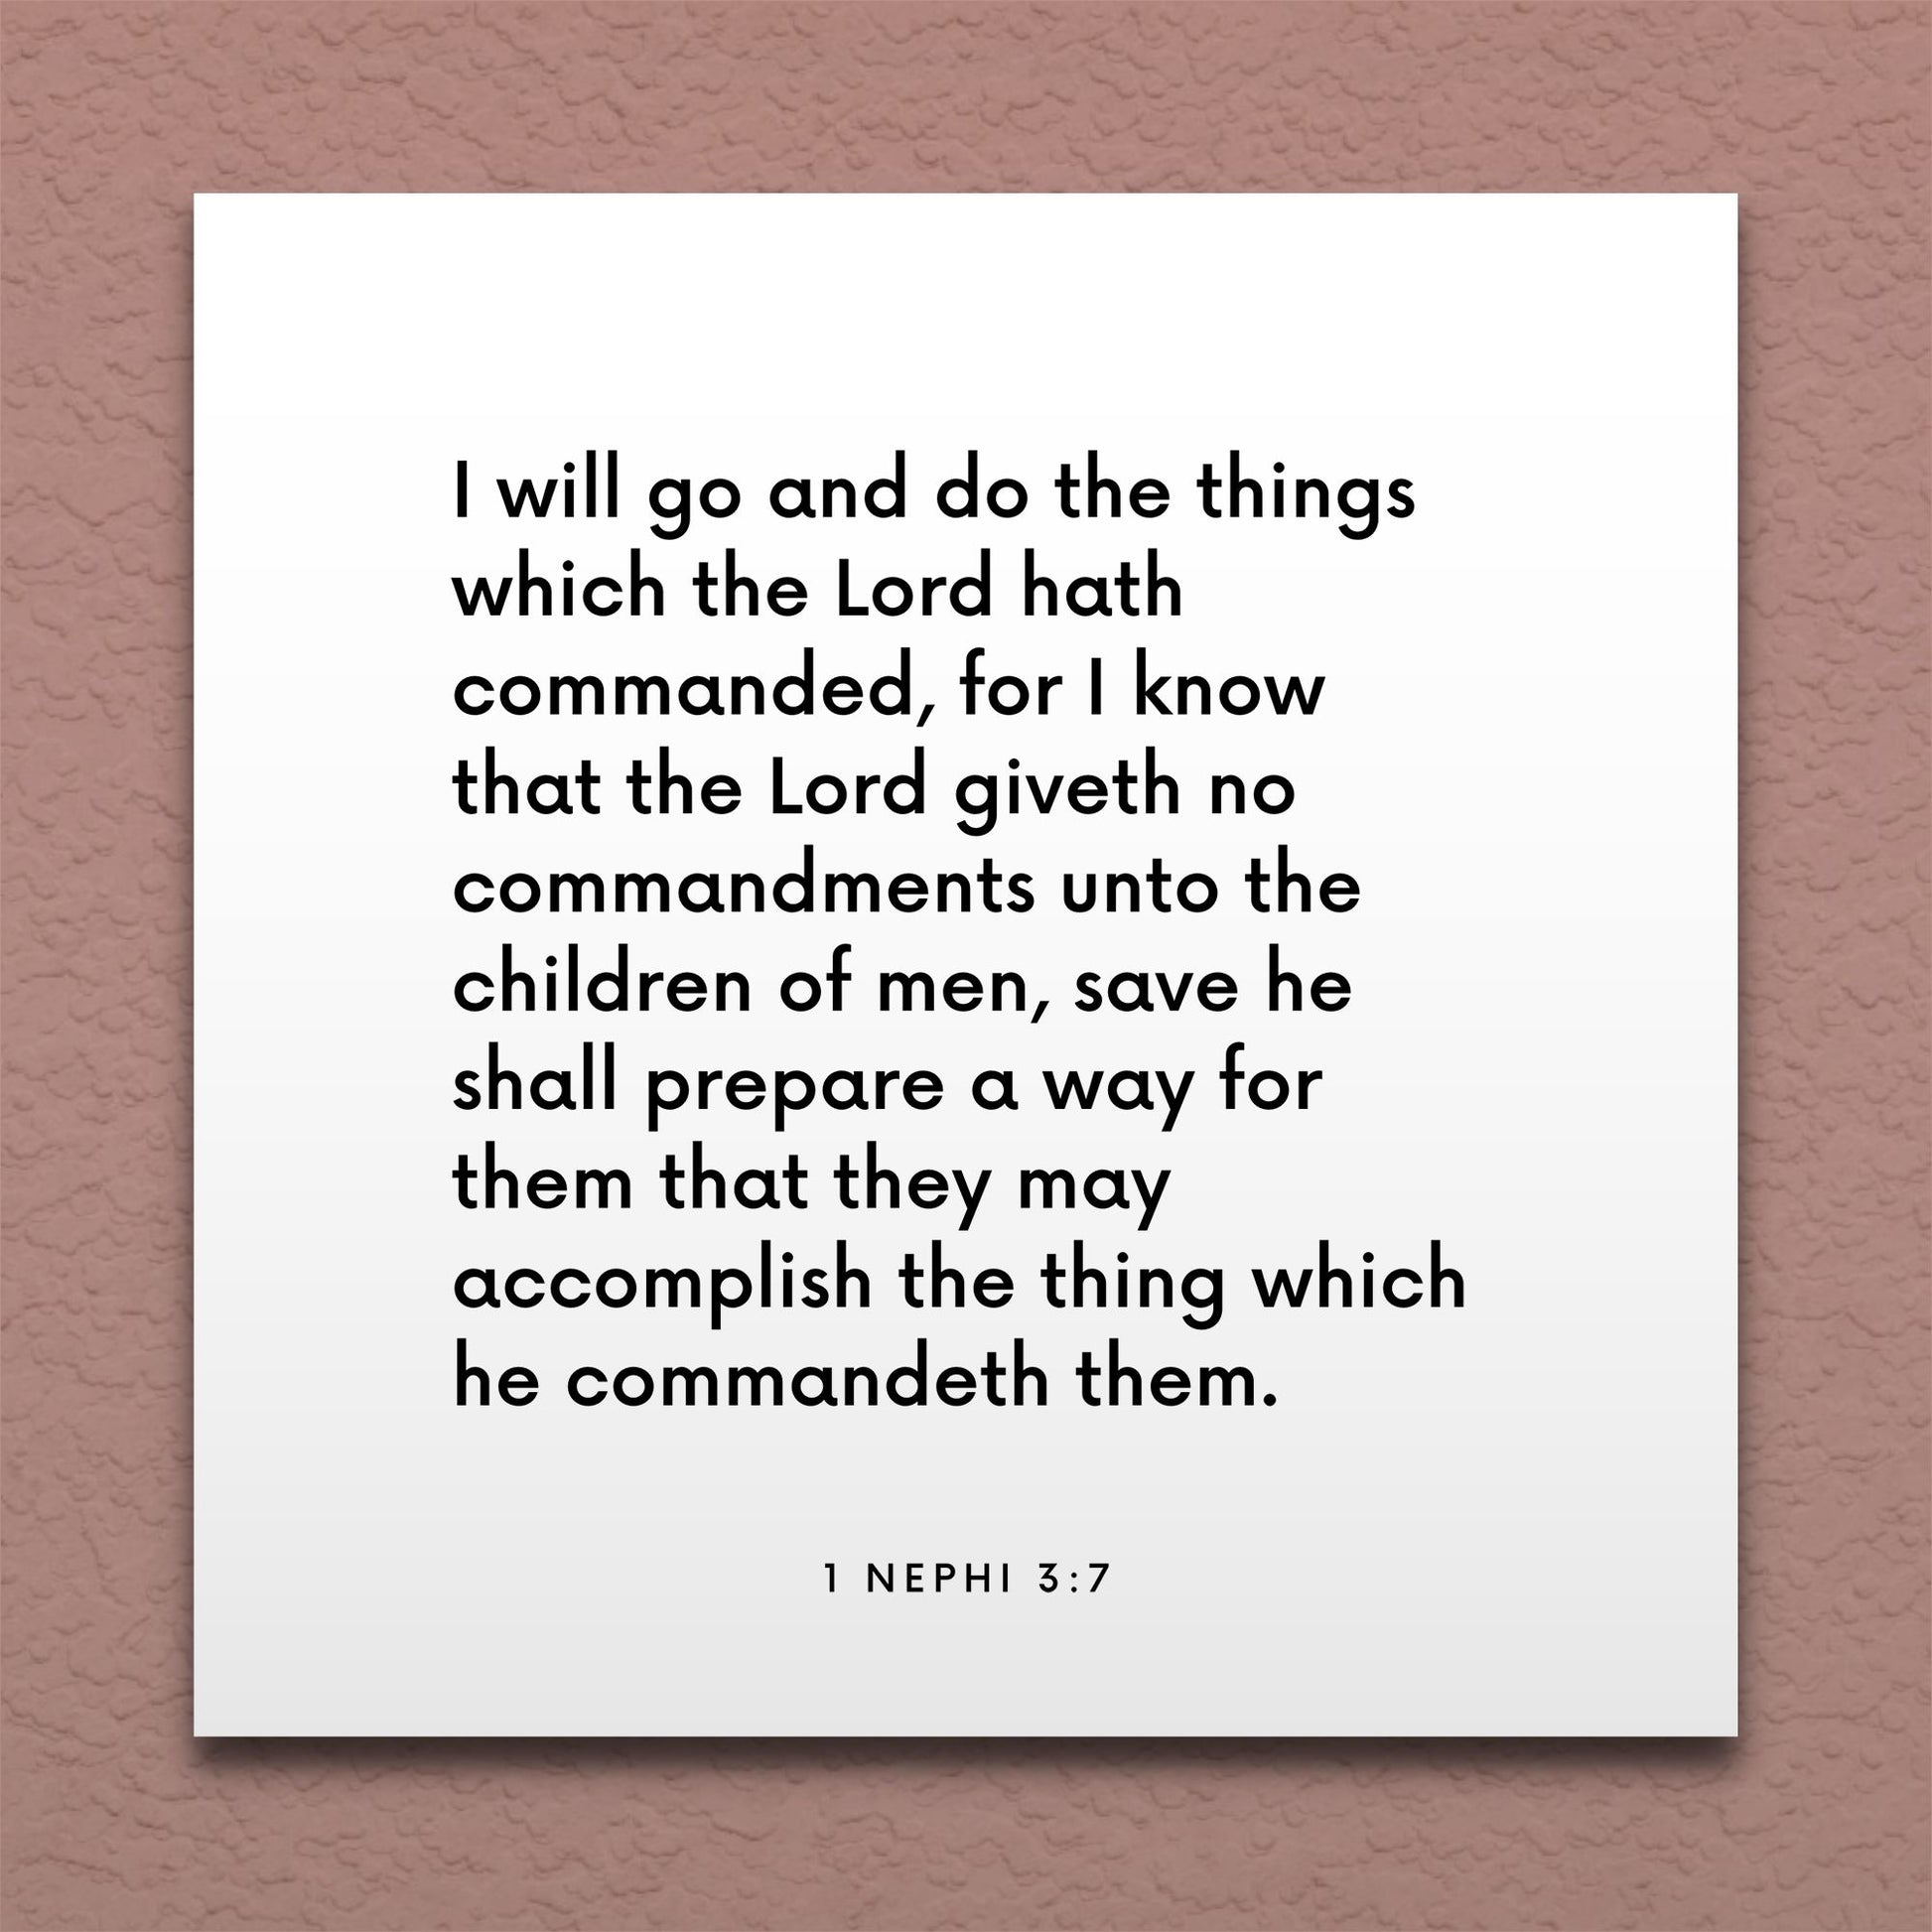 Wall-mounted scripture tile for 1 Nephi 3:7 - "I will go and do the things which the Lord hath commanded"